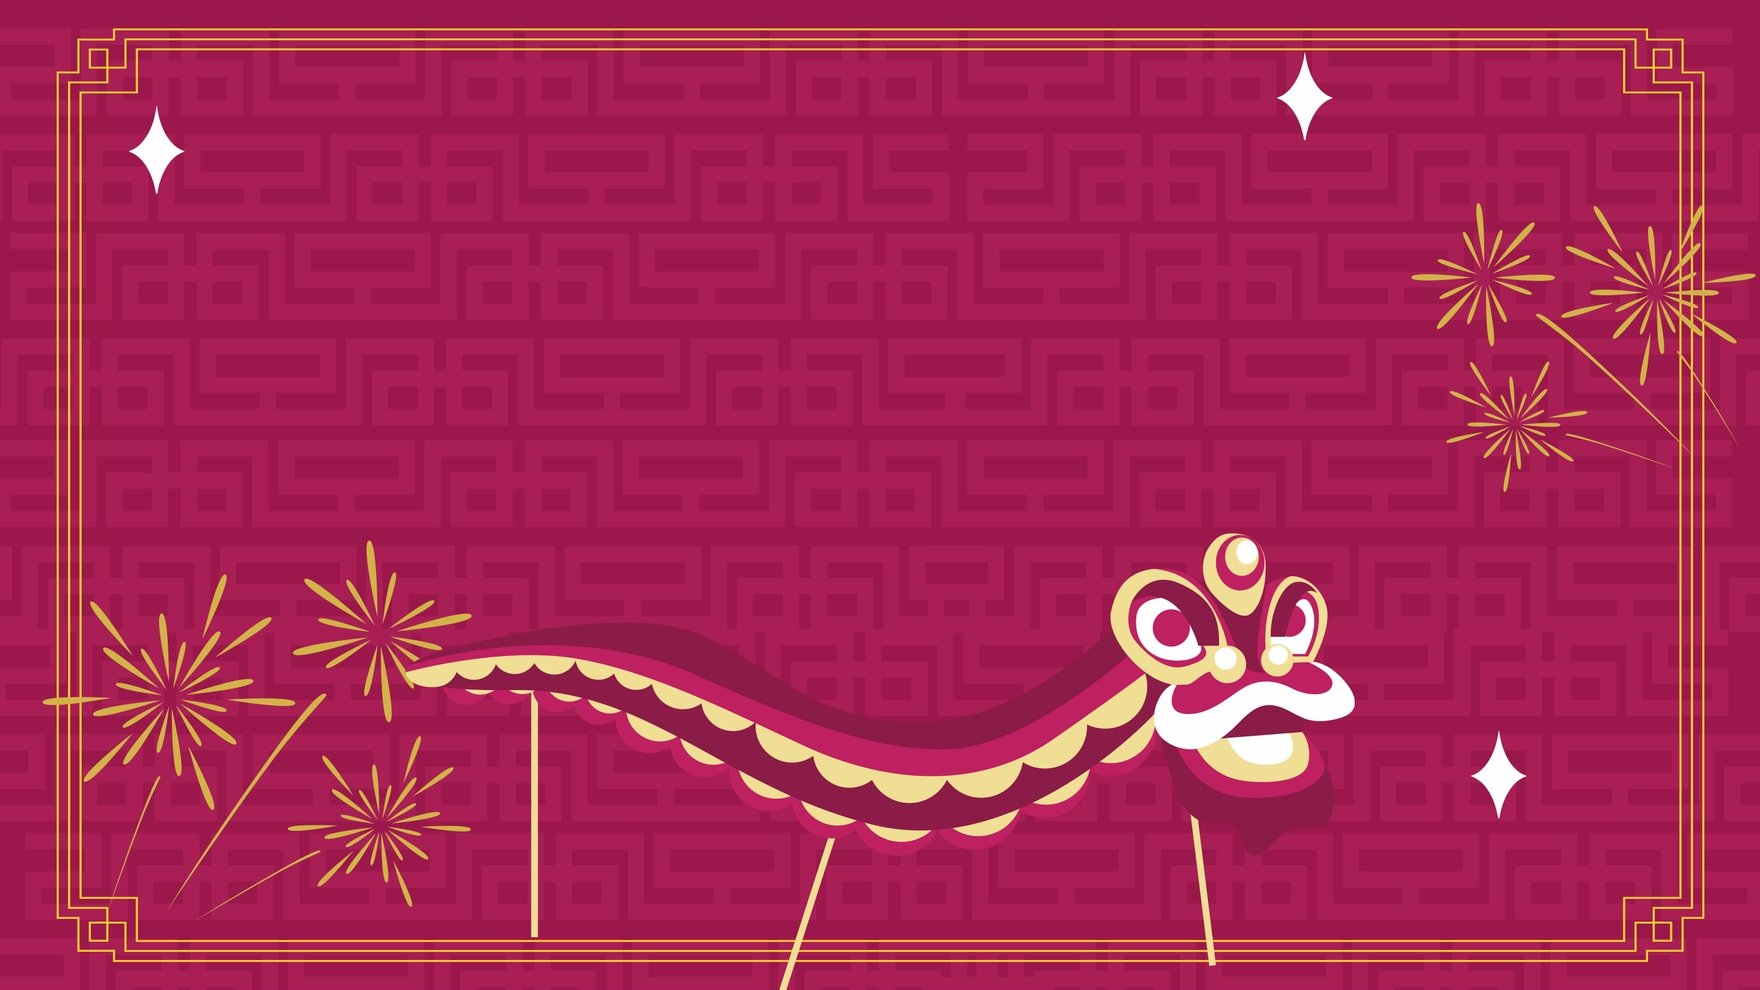 Free Chinese New Year Pattern Background in PDF, Illustrator, PSD, EPS, SVG, JPG, PNG